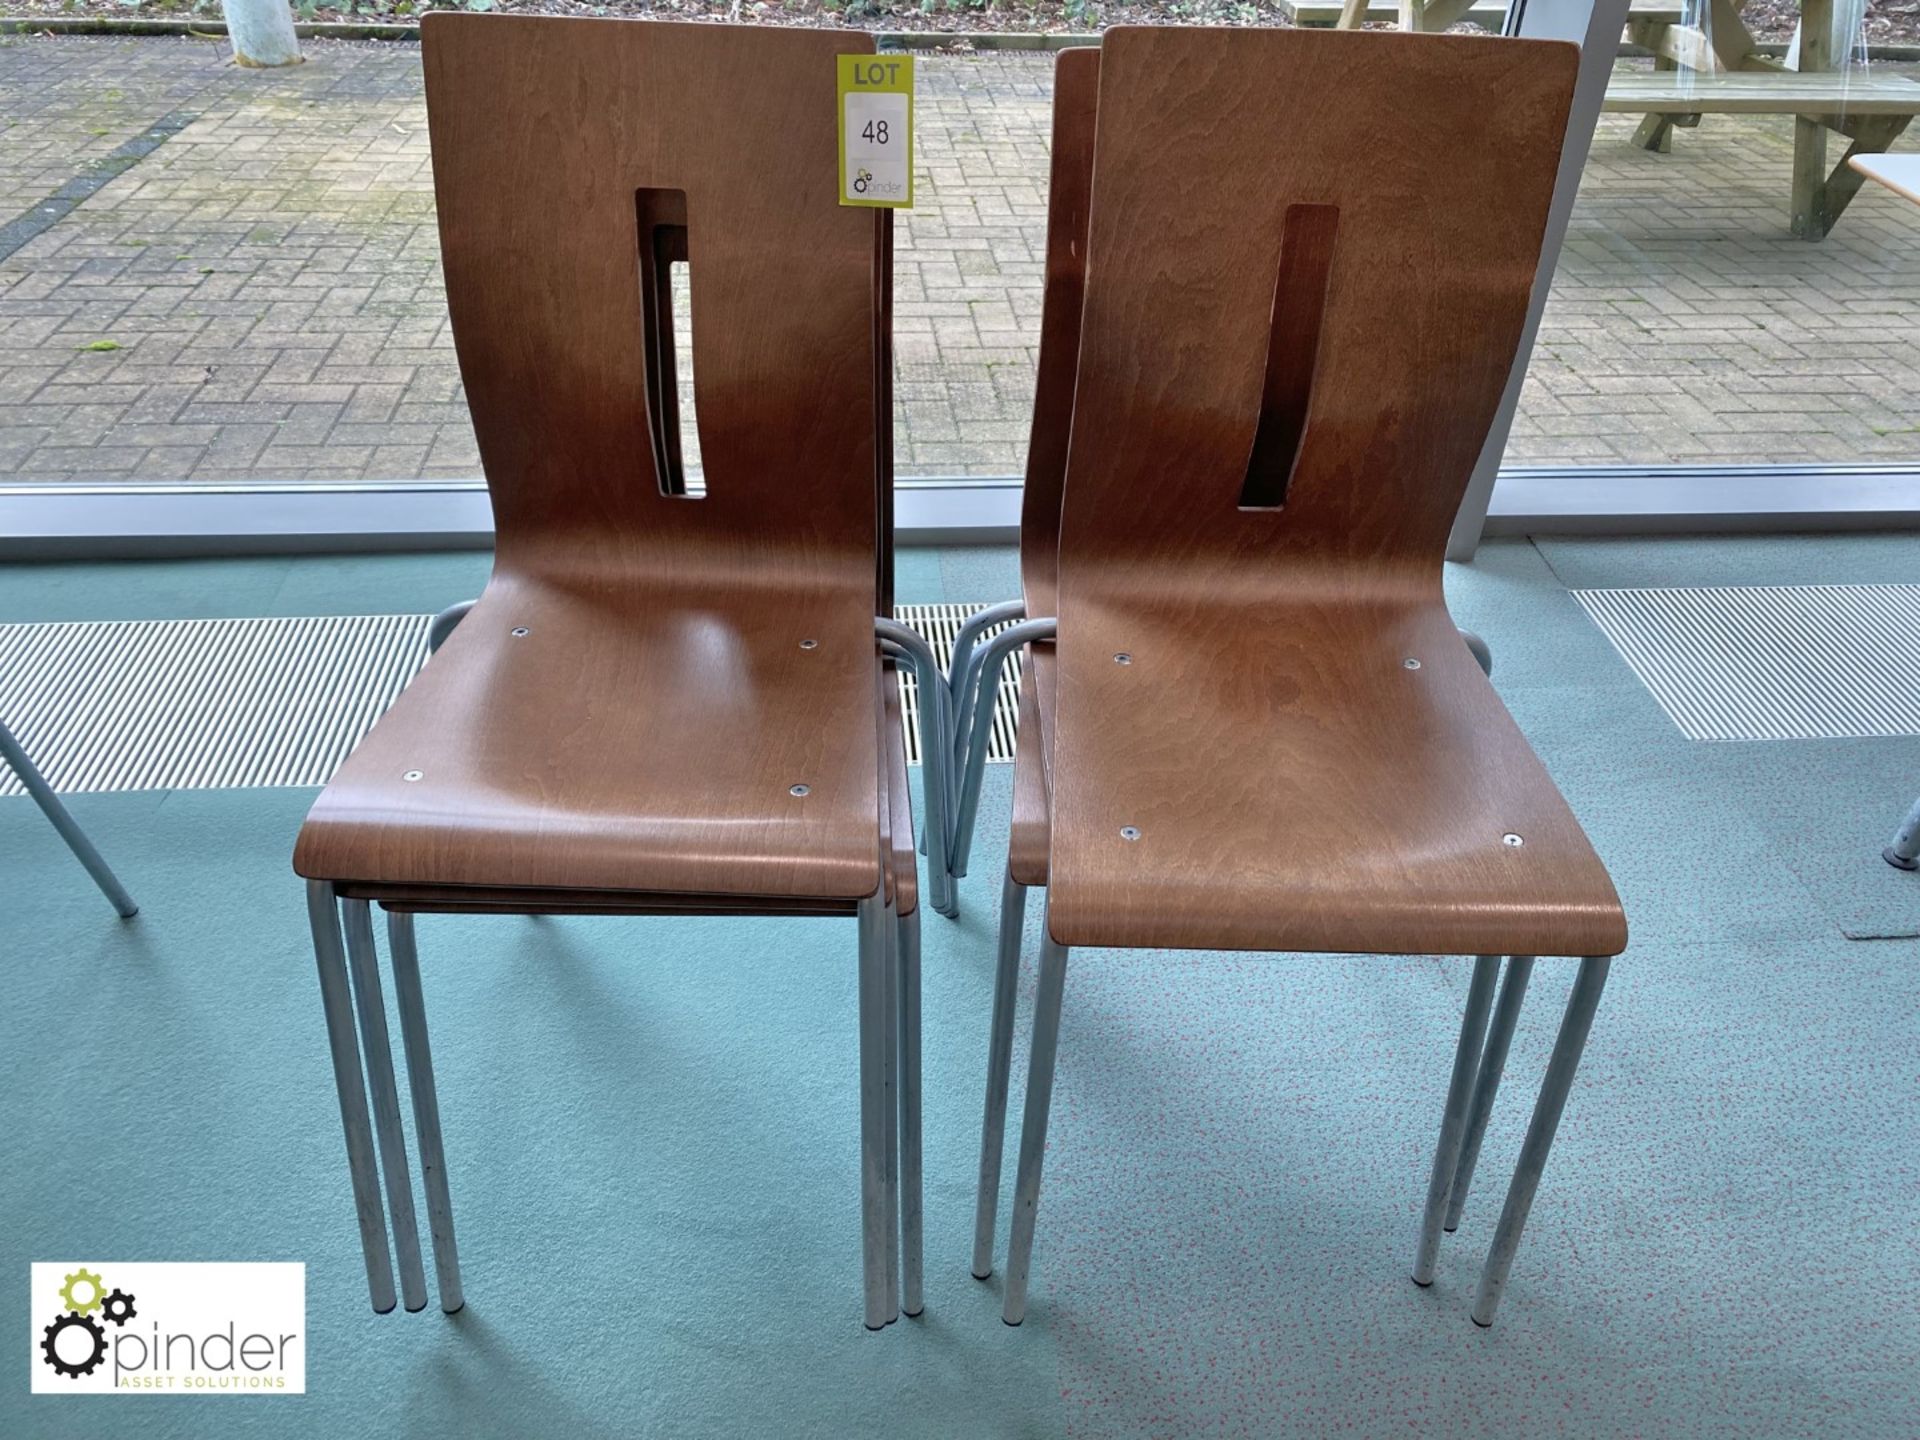 6 mahogany style Refectory Chairs (located in Canteen on ground floor)